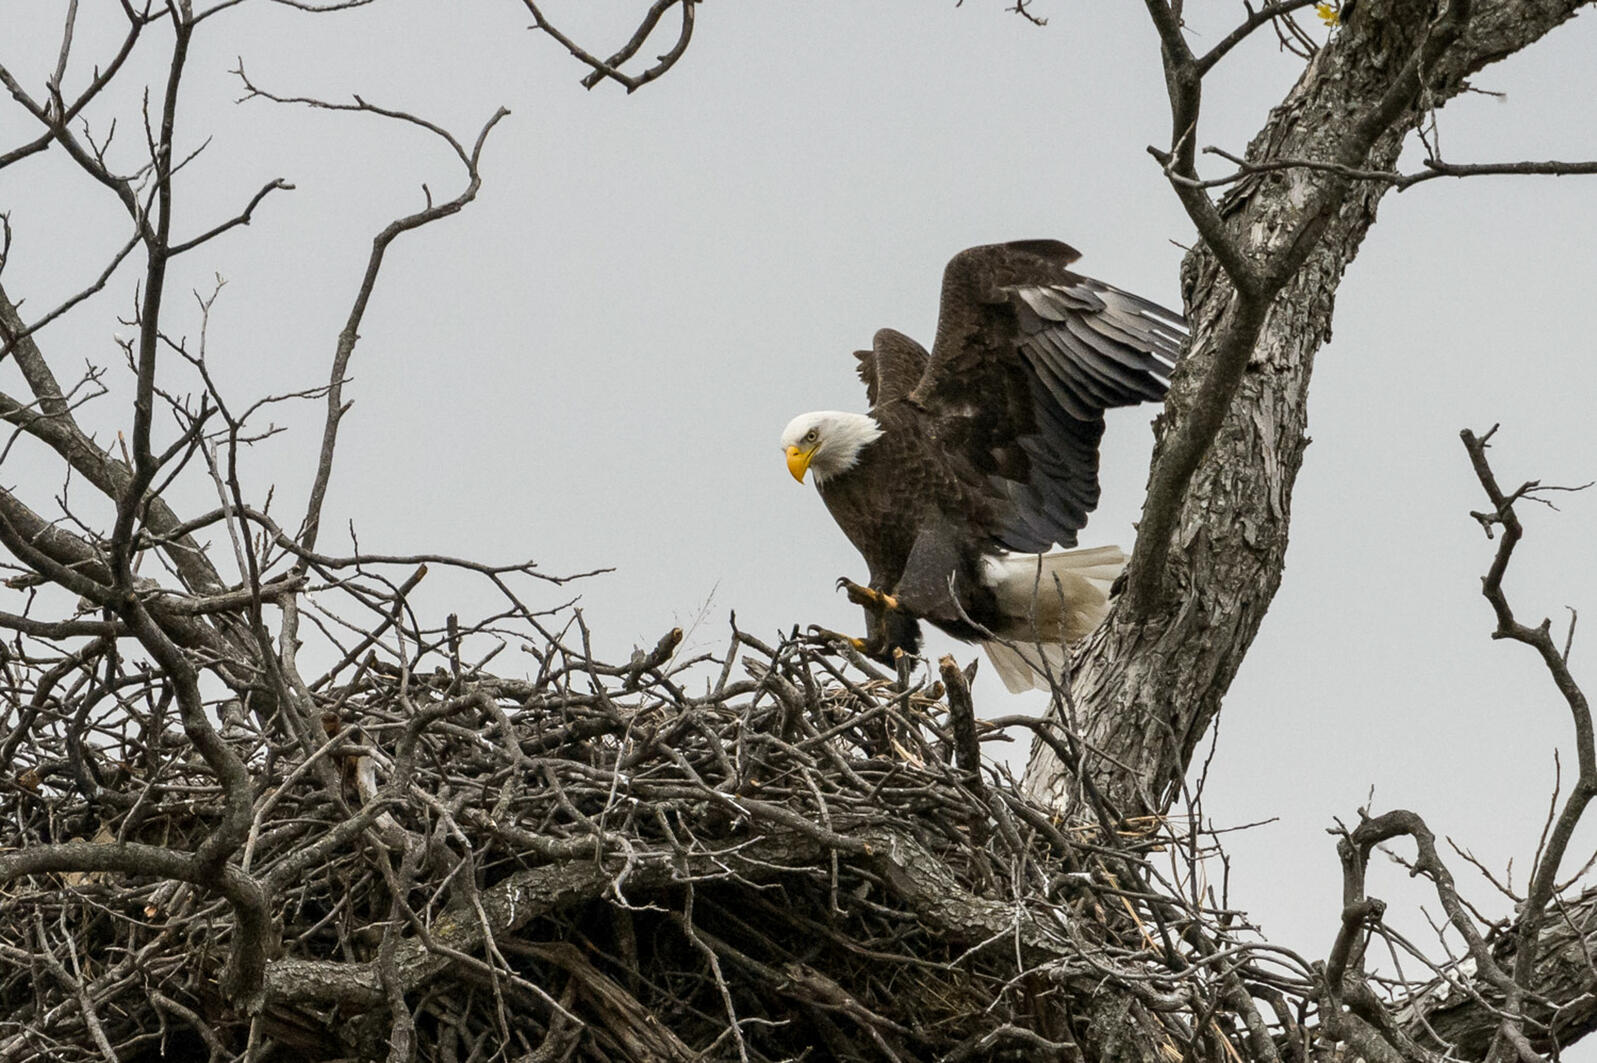 A Bald Eagle approaches its nest in a tree.